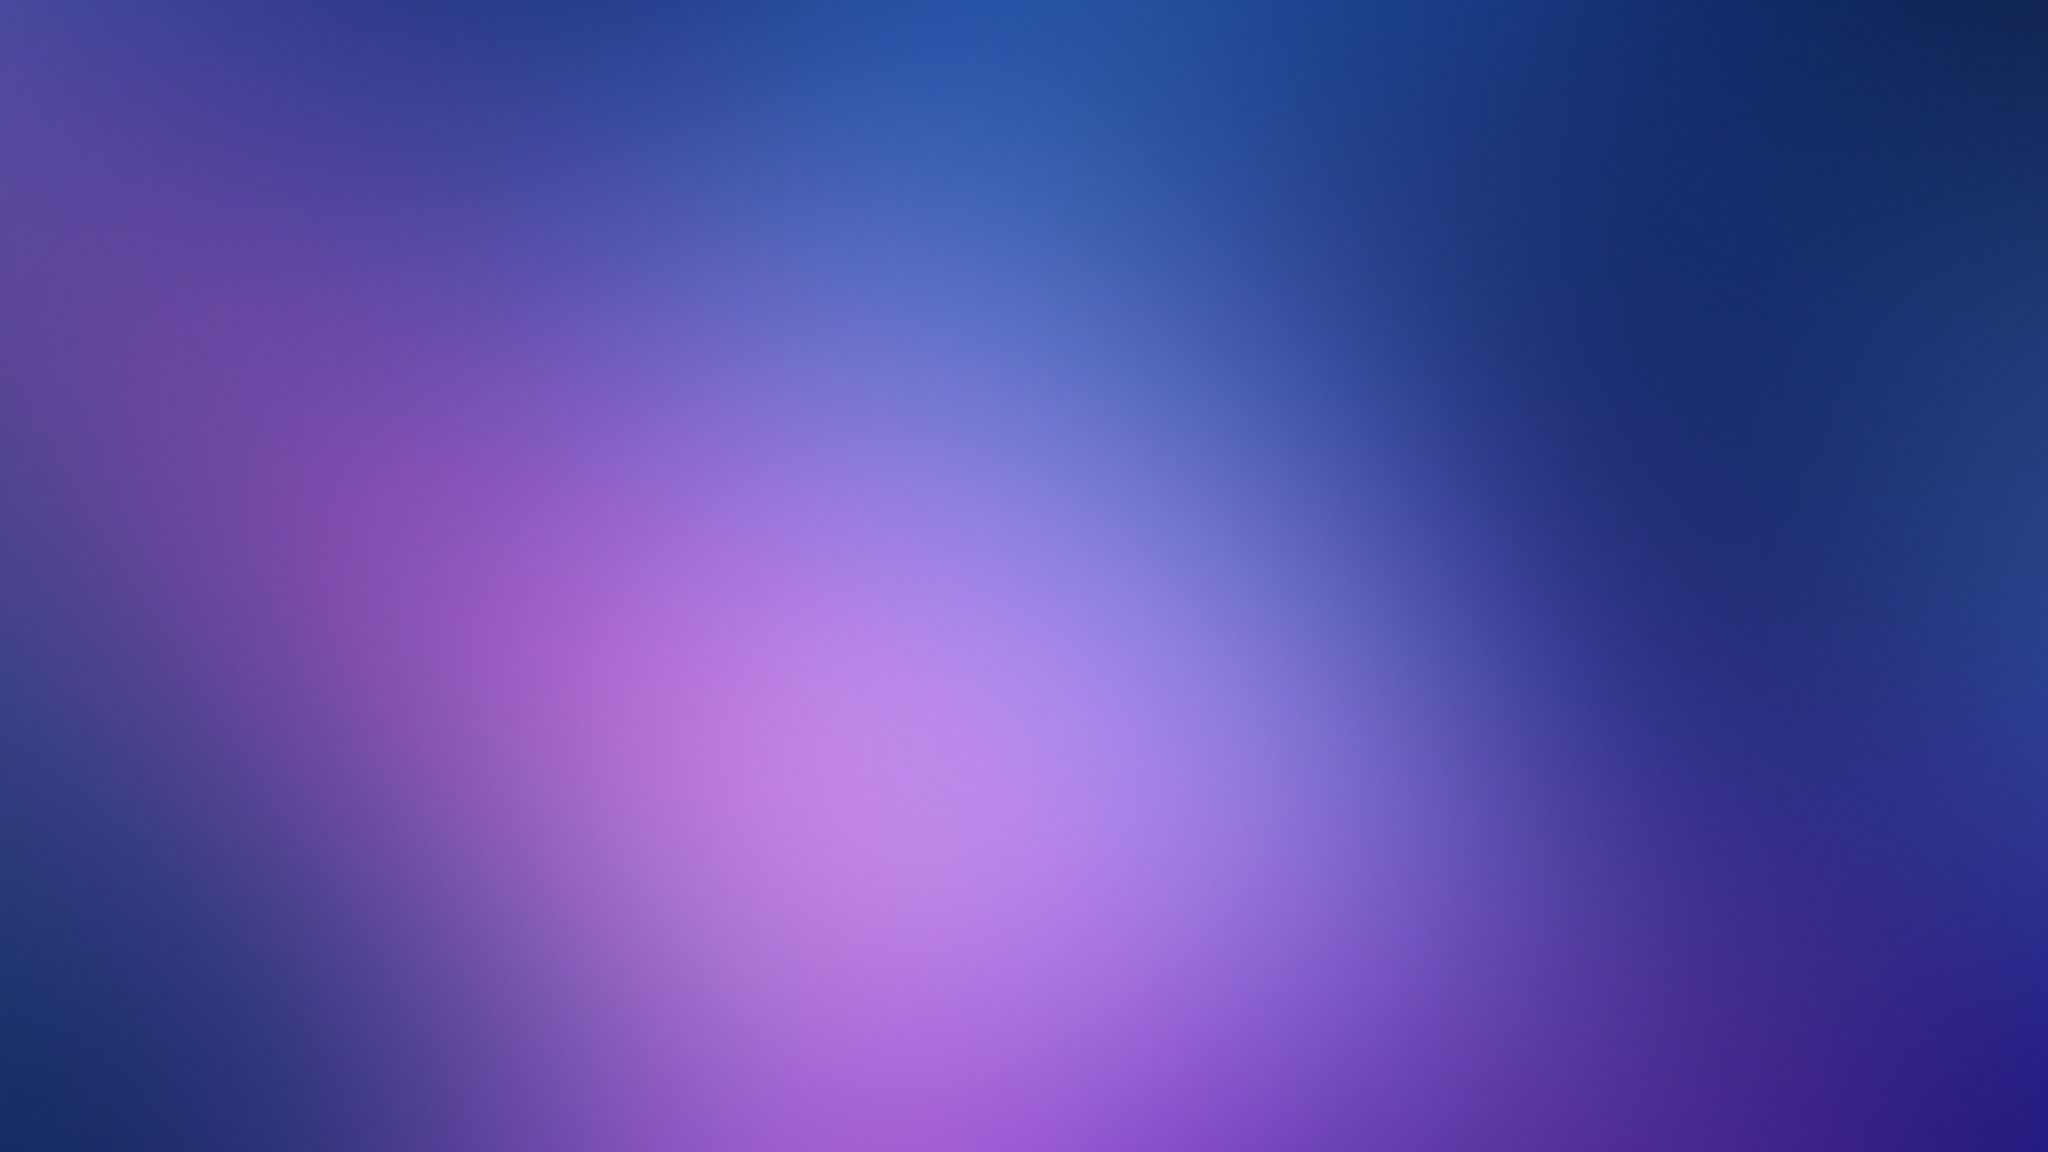 Download 2048x1152 Wallpaper Gradient Purple Blue Abstract Dual